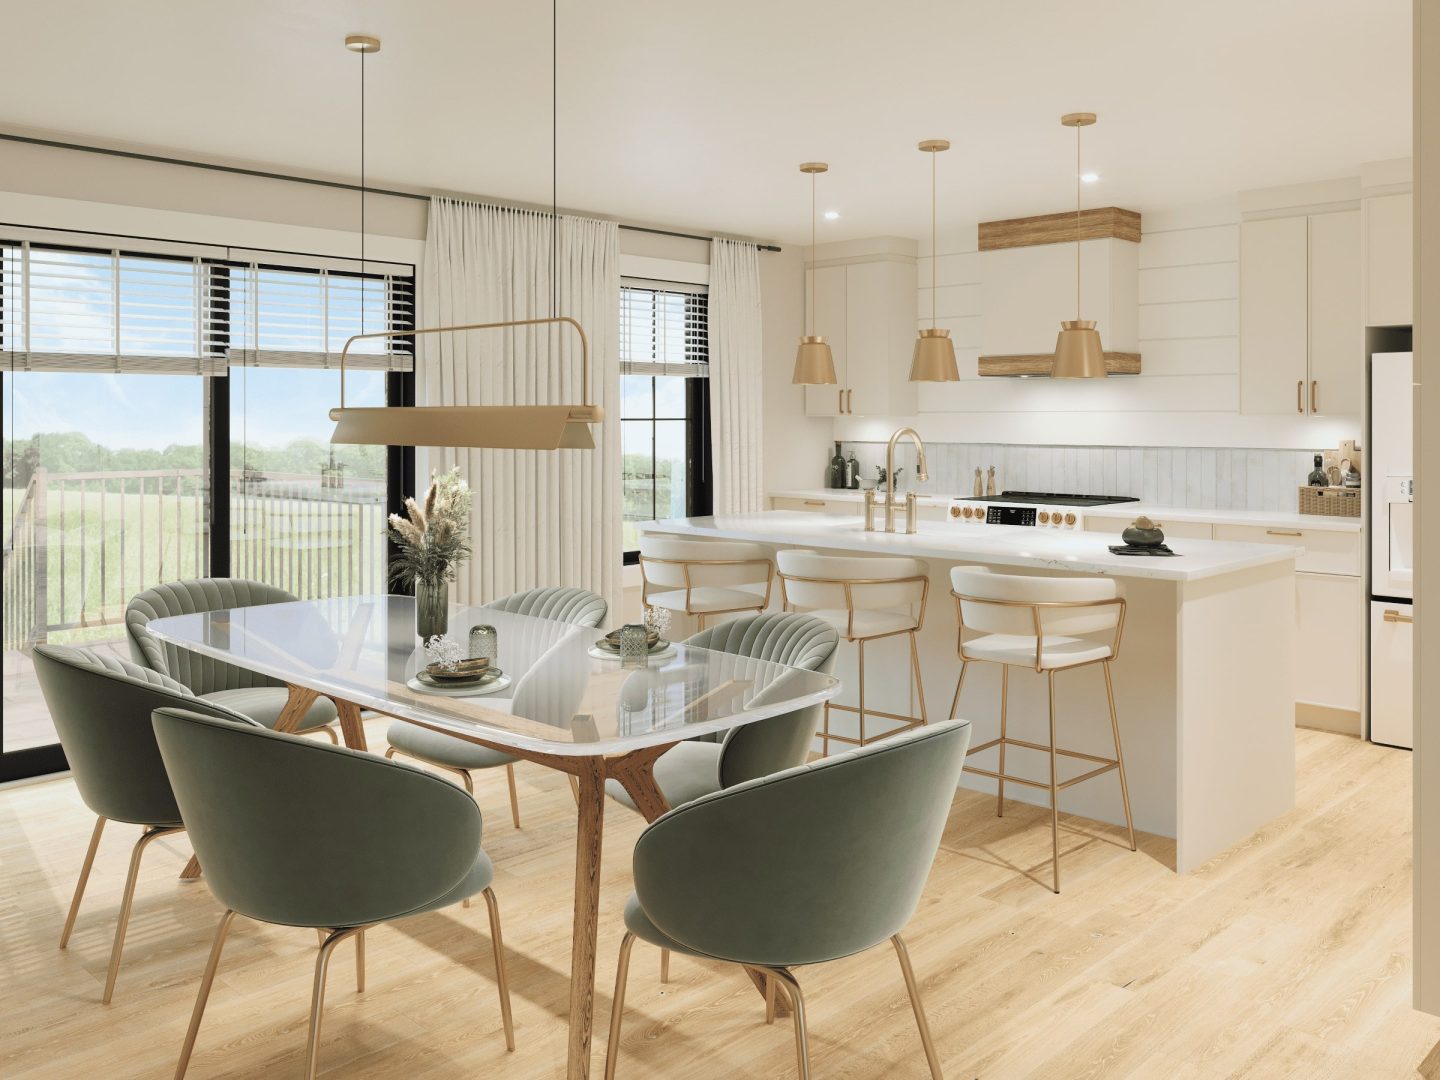 The Léa model is a contemporary one-story. View from the kitchen.